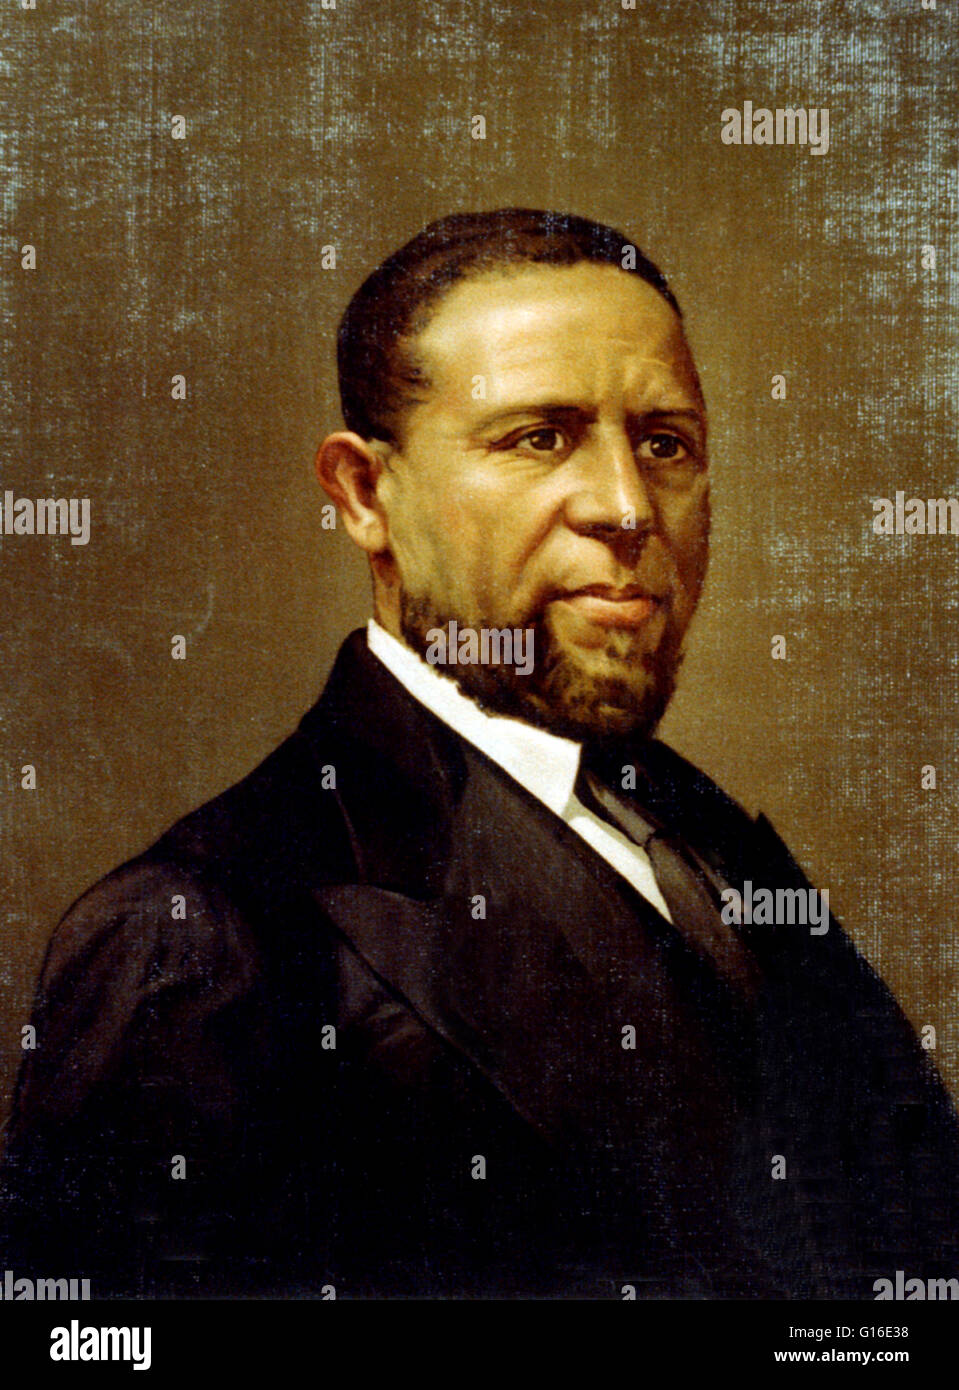 Entitled: 'Hon. H. R. Revels, United States senator from Mississippi.' Hiram Rhodes Revels (September 27, 1827 - January 16, 1901) was the first non-white to serve in the United States Senate. He was ordained a minister in 1845 and helped raise two black Stock Photo